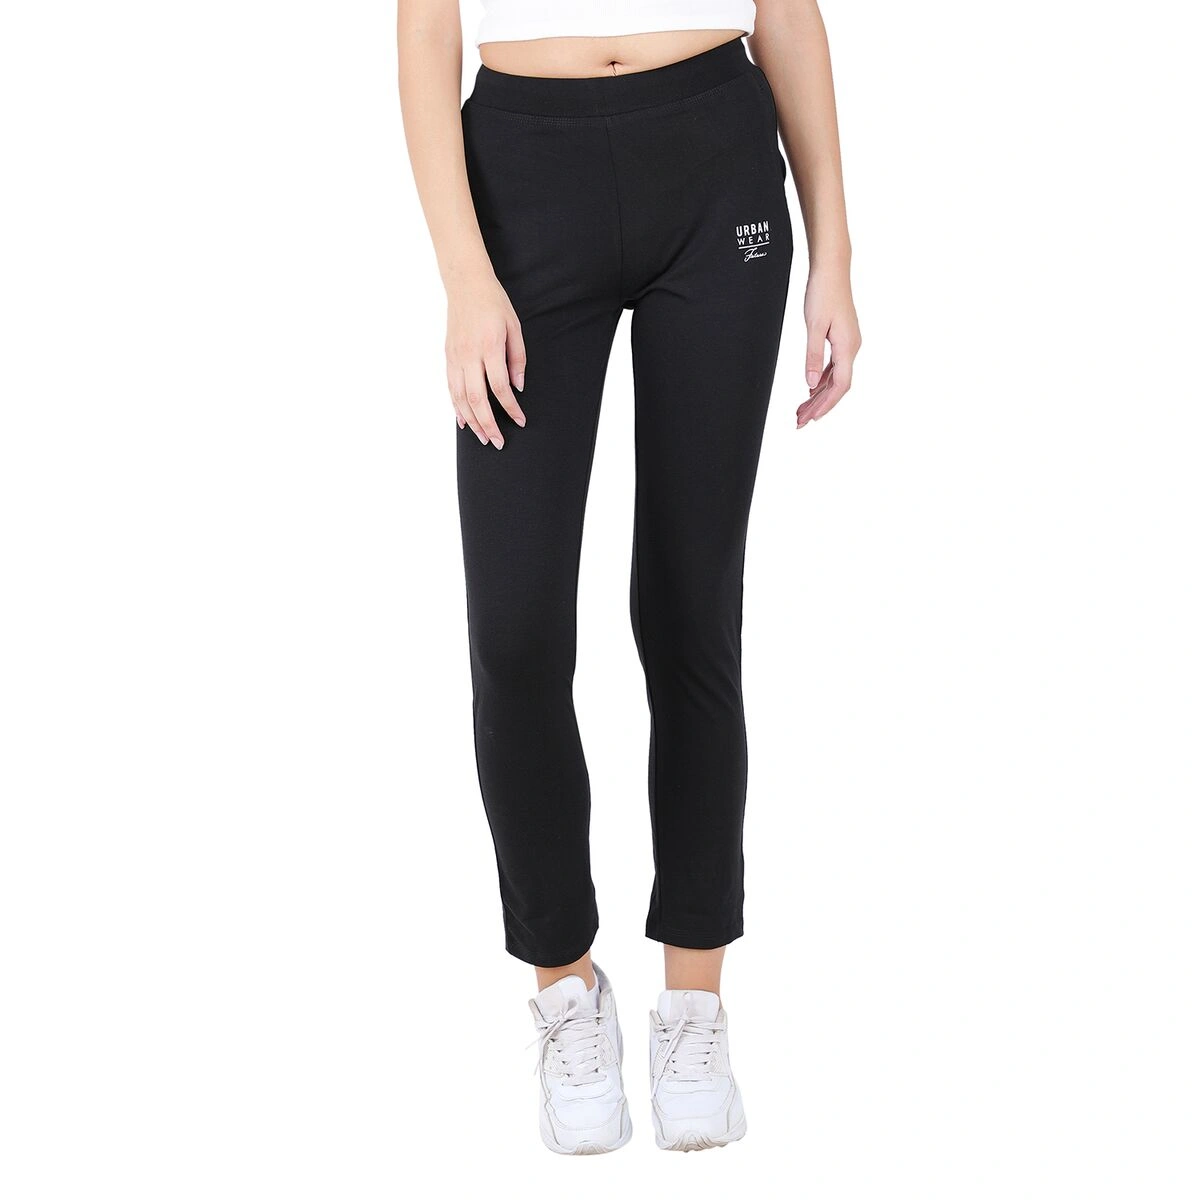 Buy Womens Gym Leggings | Back Zipper Pocket | Premum Stretch Fabric (S,  Black and Blue) at Amazon.in